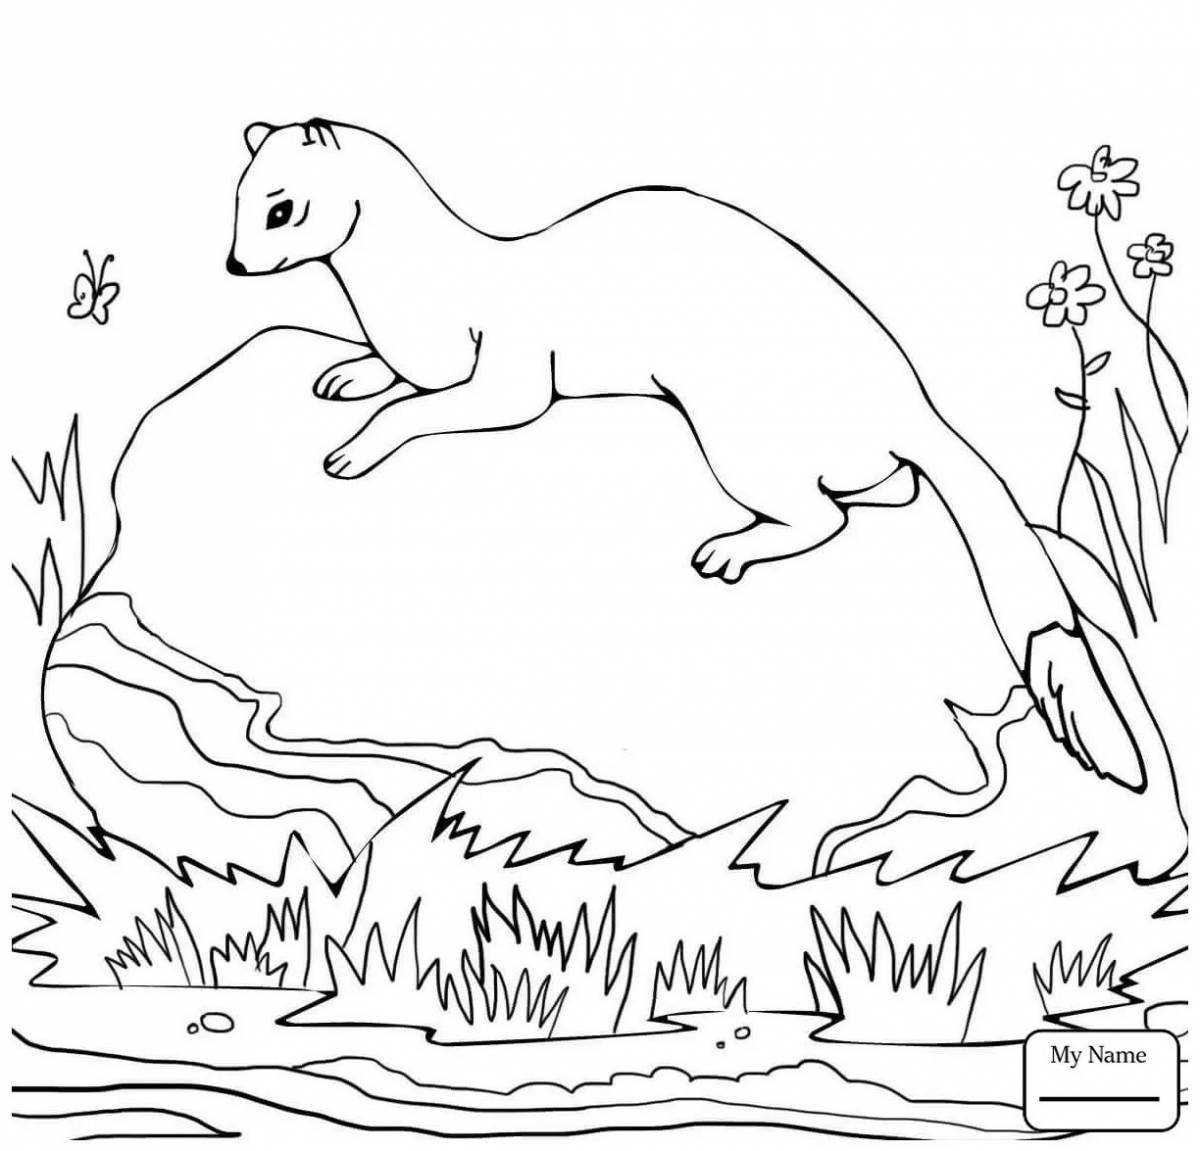 Playful stoat coloring page for kids